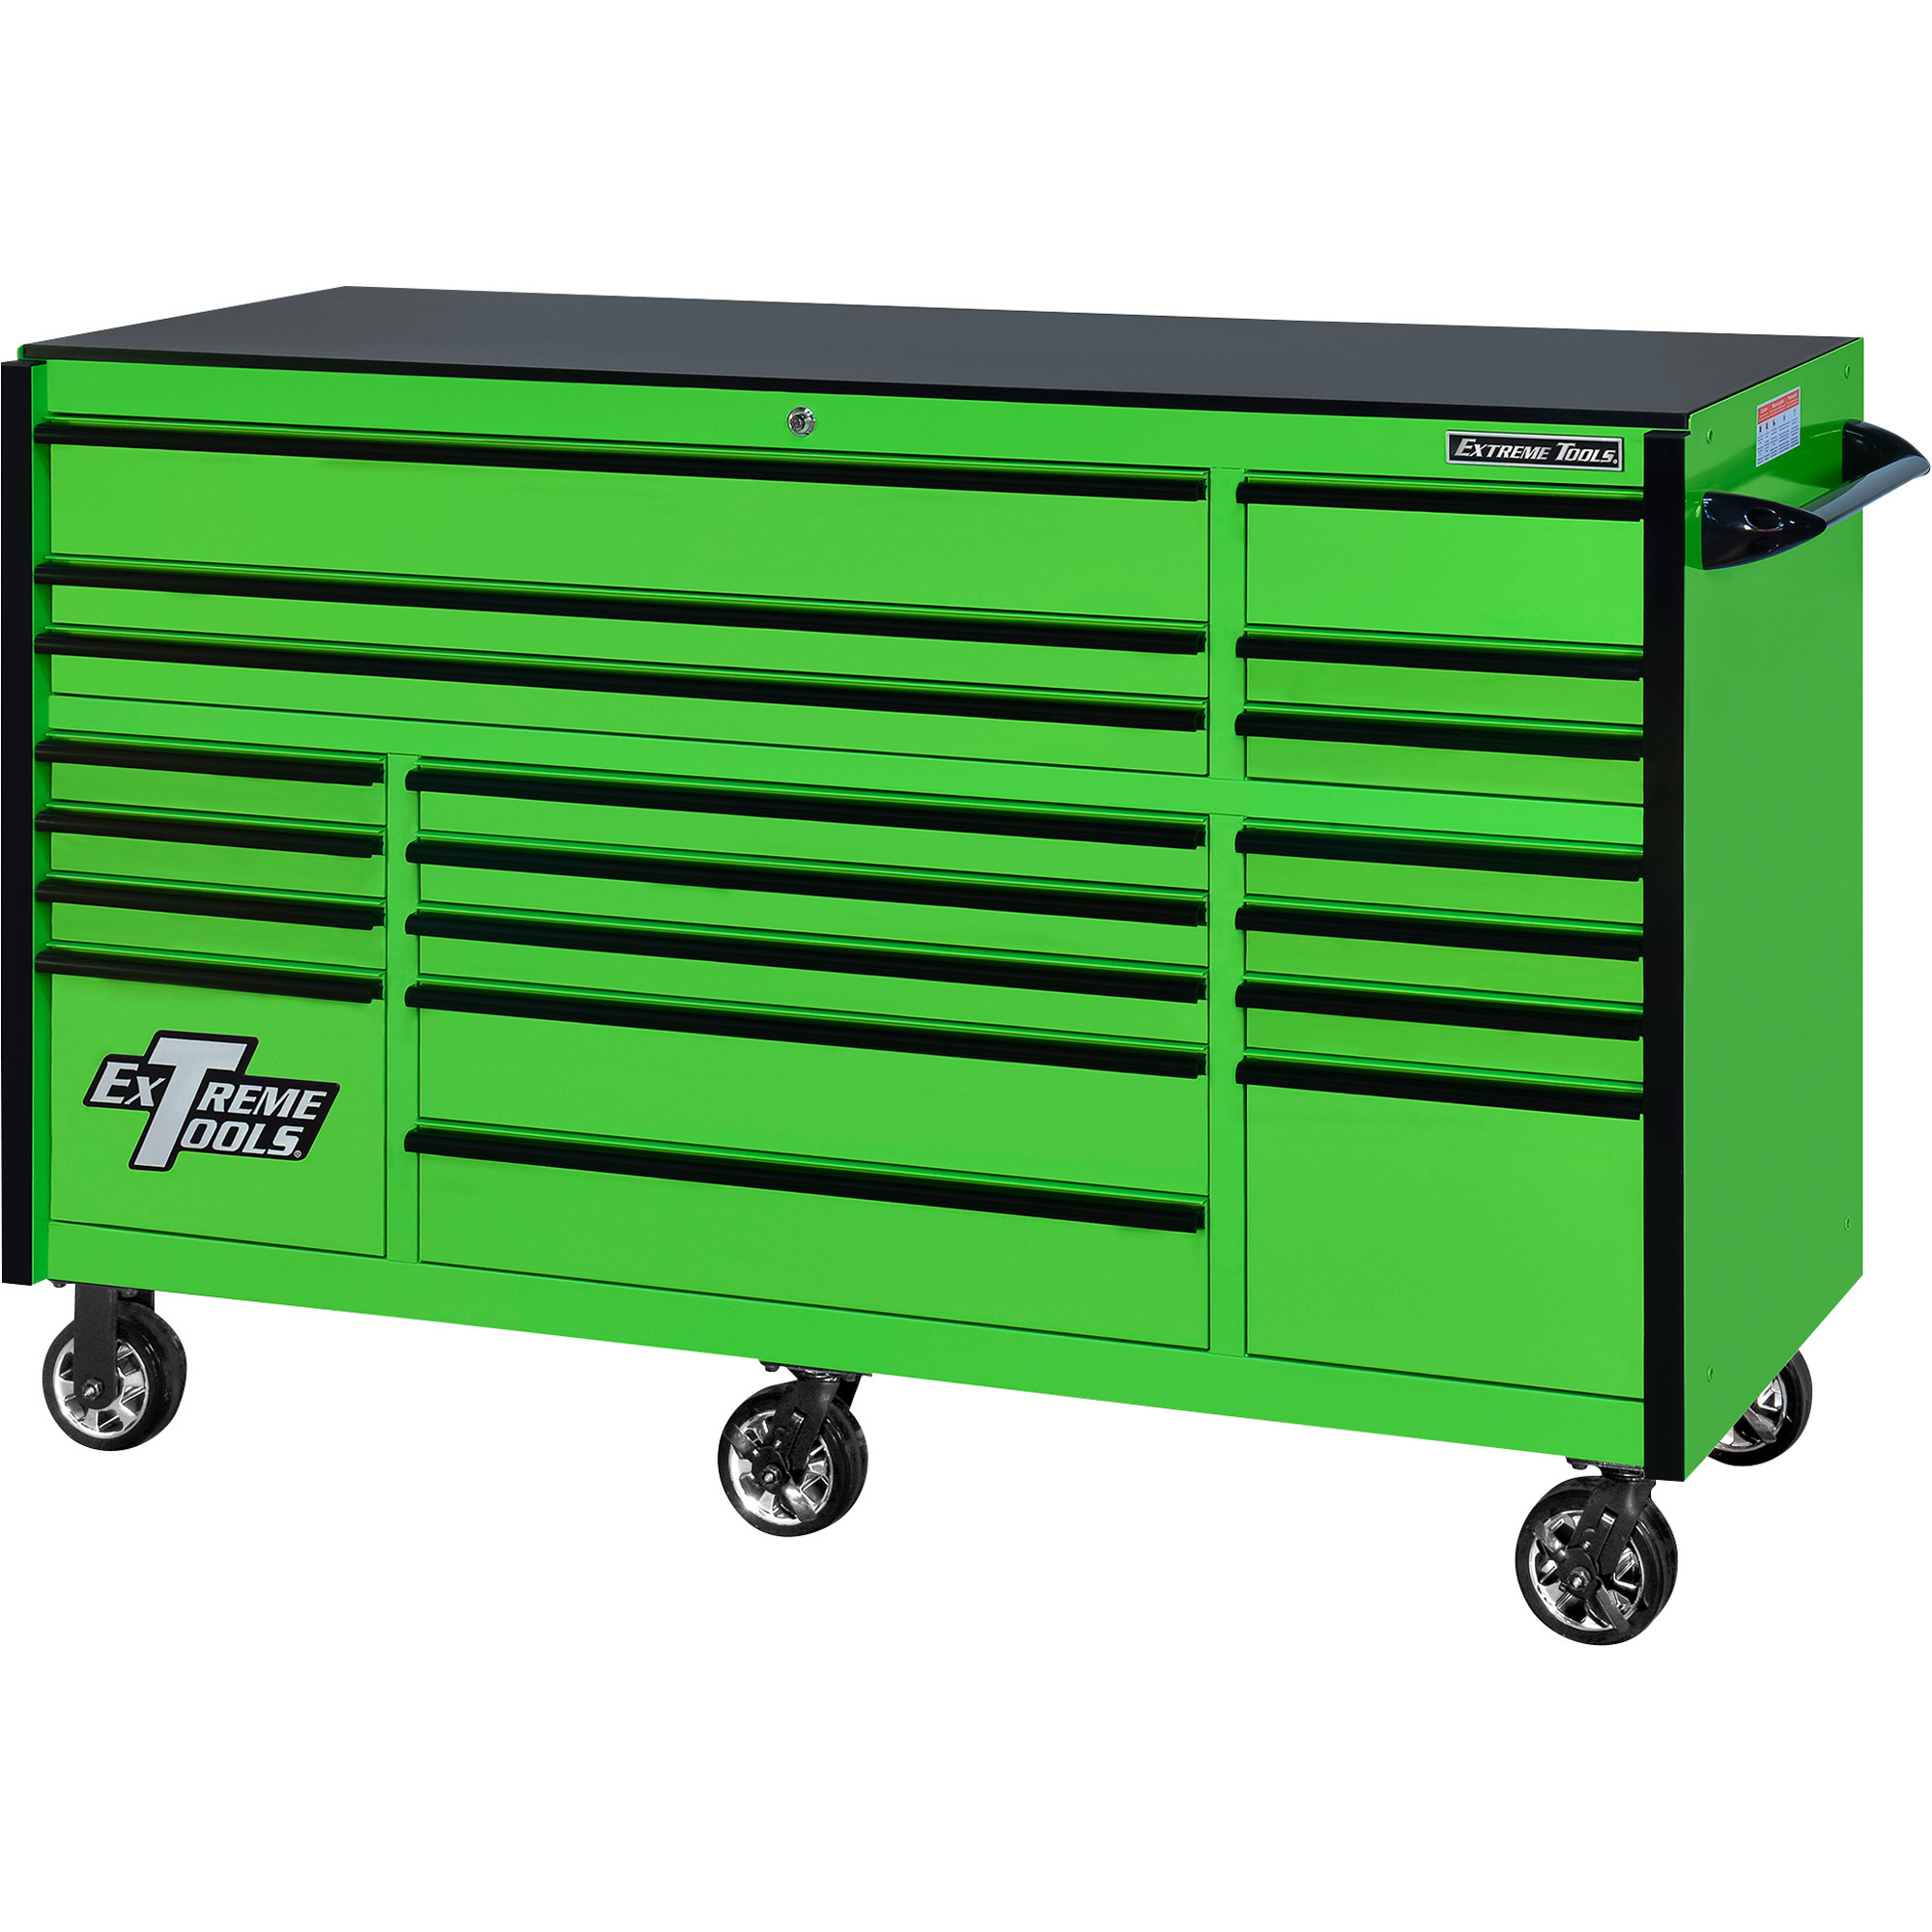 Extreme Tools RX Series 72Inch L x 30Inch W 19 Drawer Tool Roller Cabinet — Green with Black Drawer Pulls, 72Inch W x 30Inch D x 47Inch H, Model -  RX723019RCGNBK-250